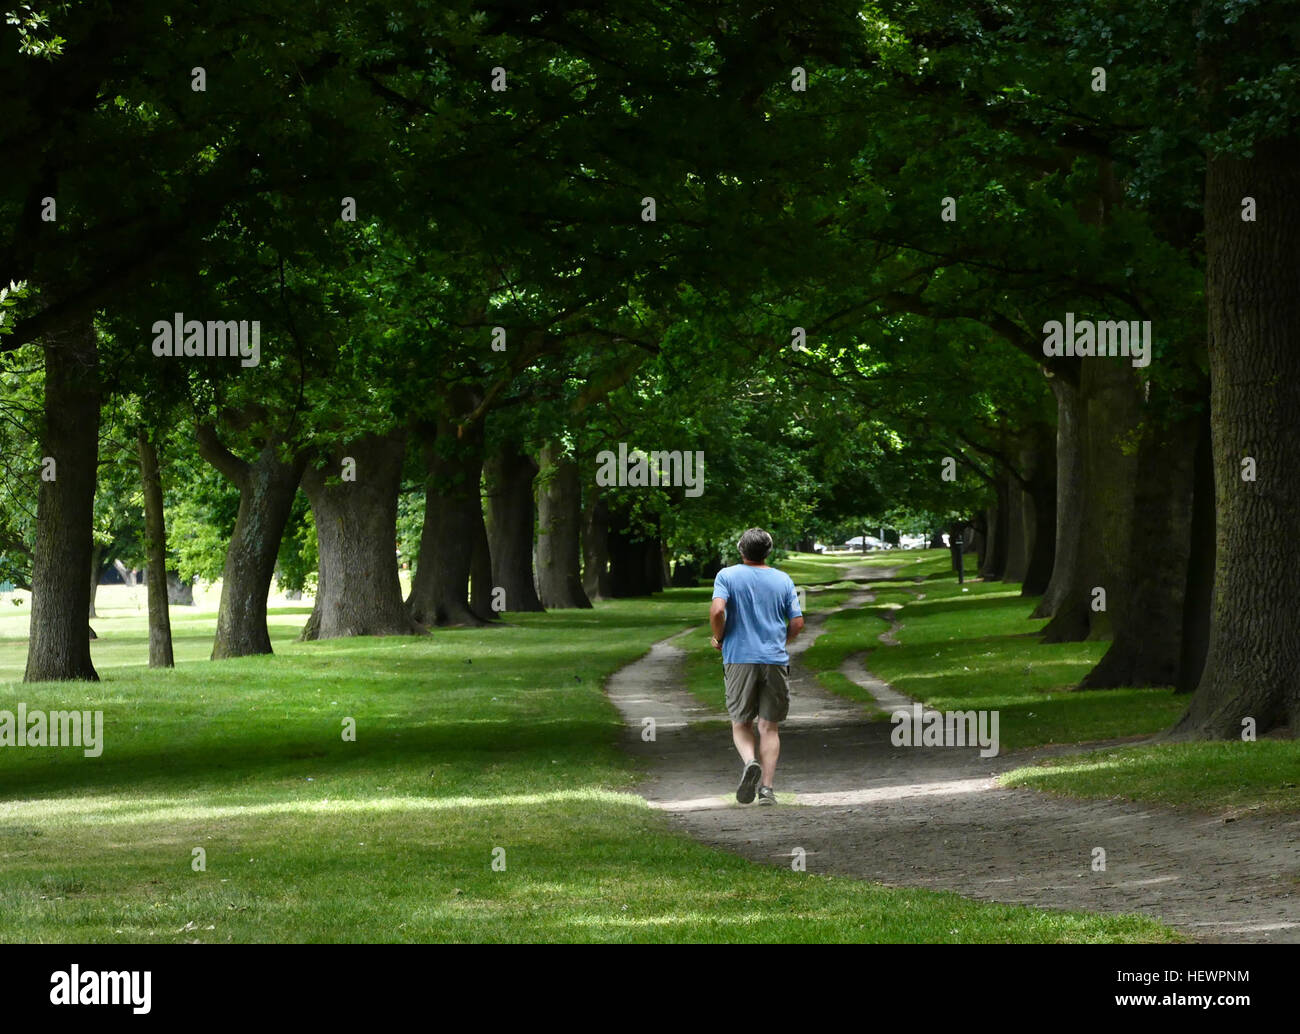 Jogging is a form of trotting or running at a slow or leisurely pace. The main intention is to increase physical fitness with less stress on the body than from faster running, or to maintain a steady speed for longer periods of time. Performed over long distances, it is a form of aerobic endurance training. Hagley Park is the largest urban open space in Christchurch, New Zealand, and was created in 1855 by the Provincial Government. Stock Photo